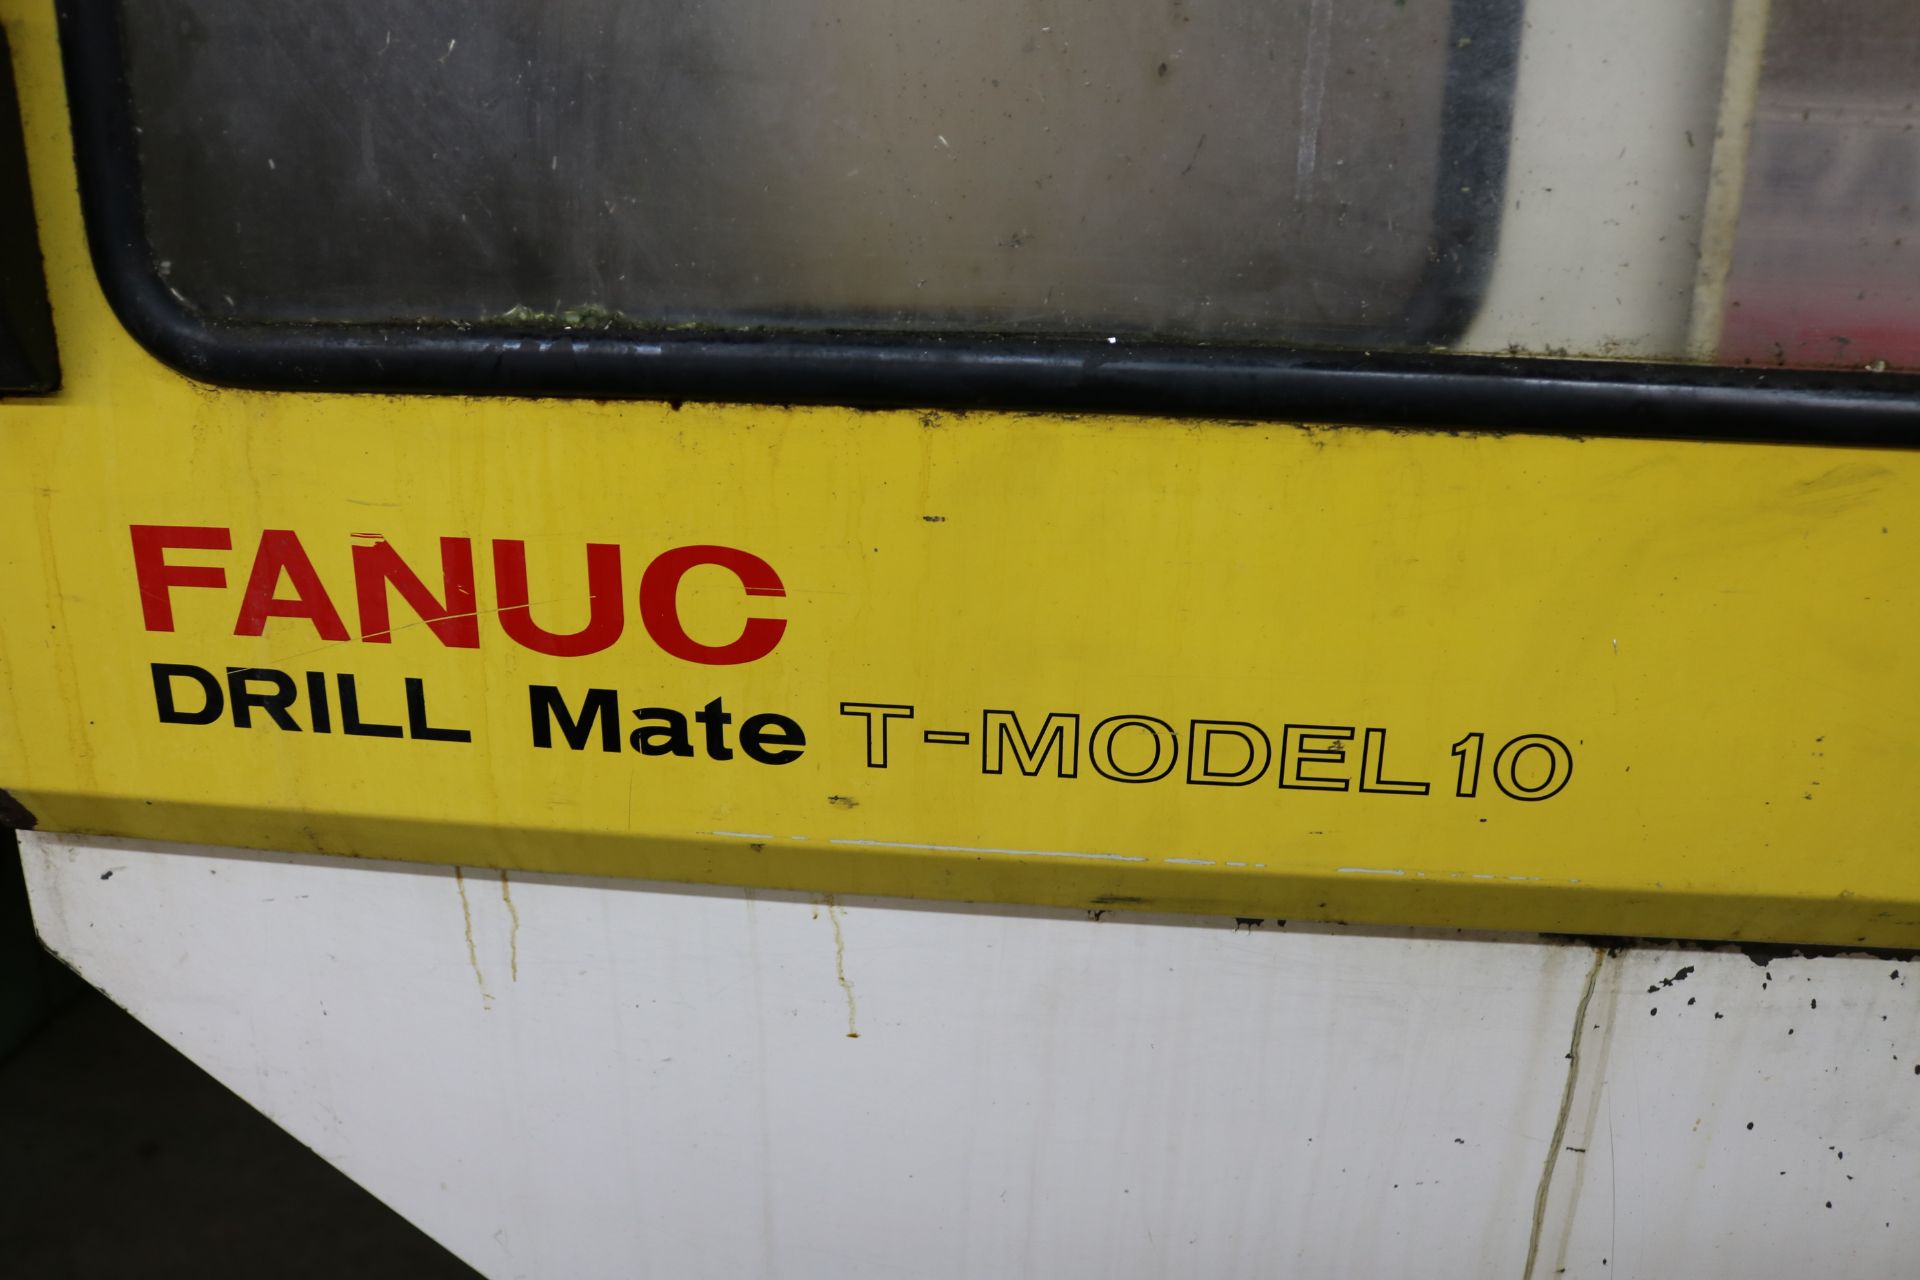 FANUC DRILL MATE CNC VERTICAL TAPPING CENTER, MODEL 10, TRAVELS: 19.6" X 14.9" X 12.9", 36" X 14" - Image 4 of 11